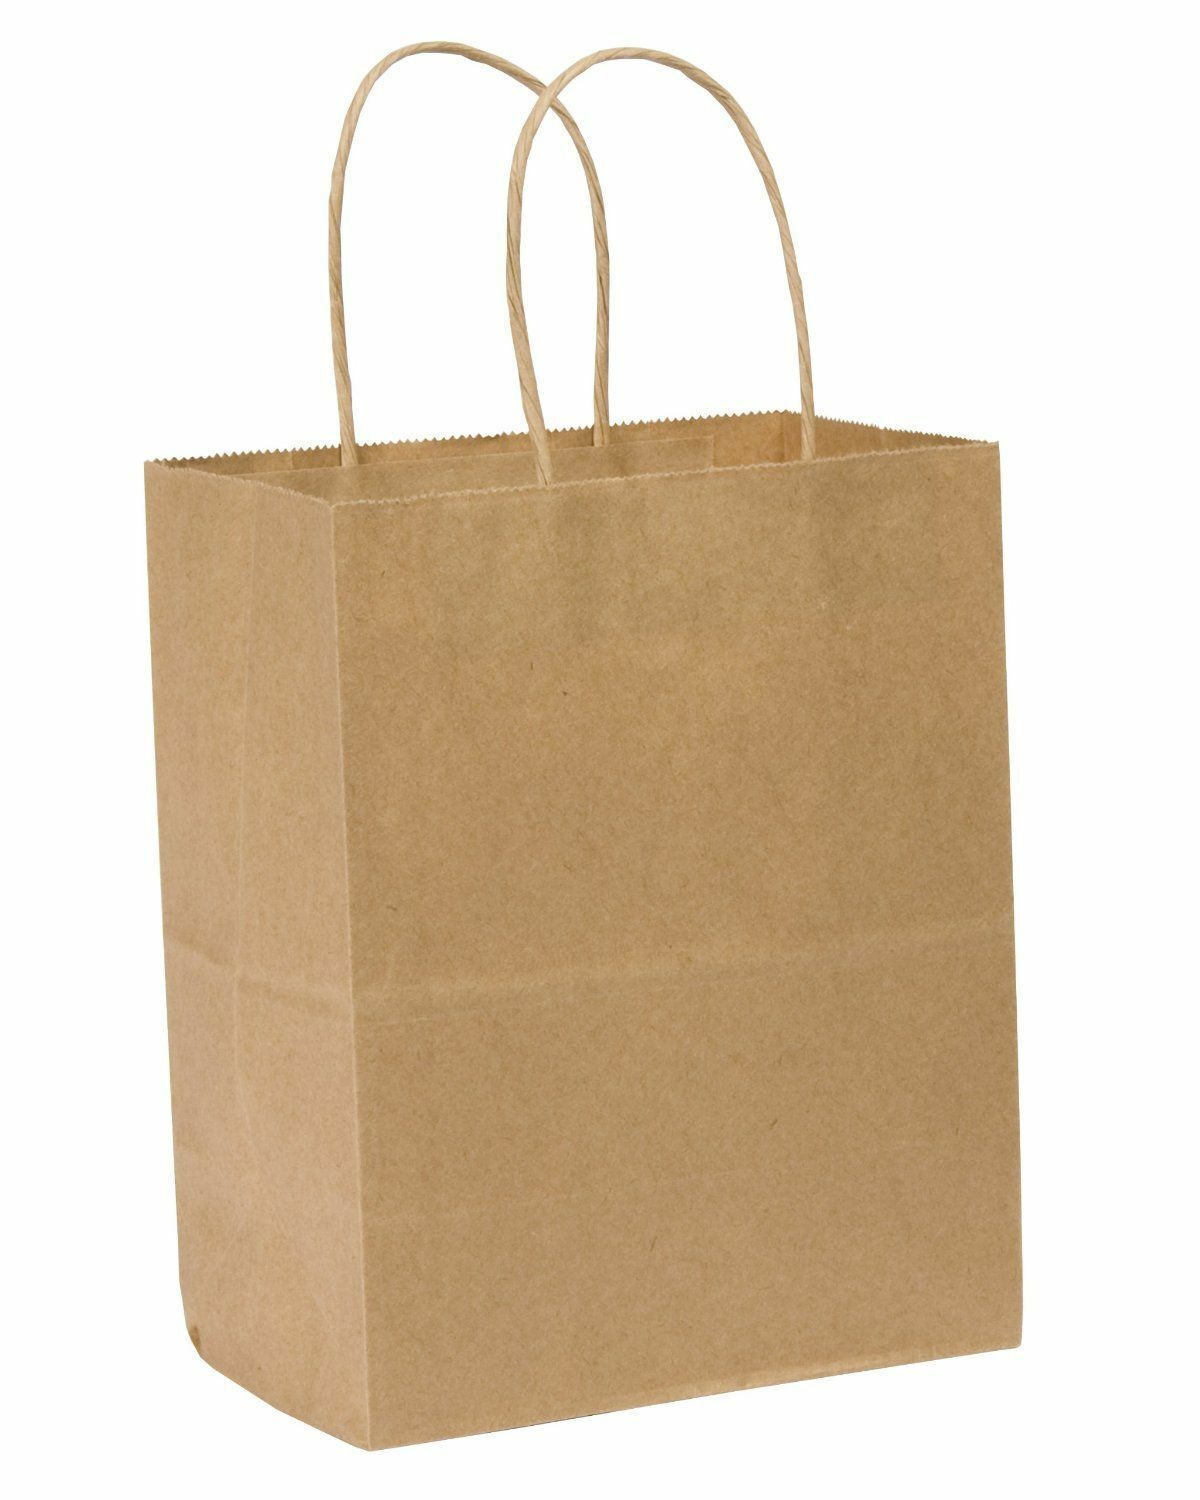 Kraft Paper Bag Party Shopping Gift Bags Retail Merchandise with Handles